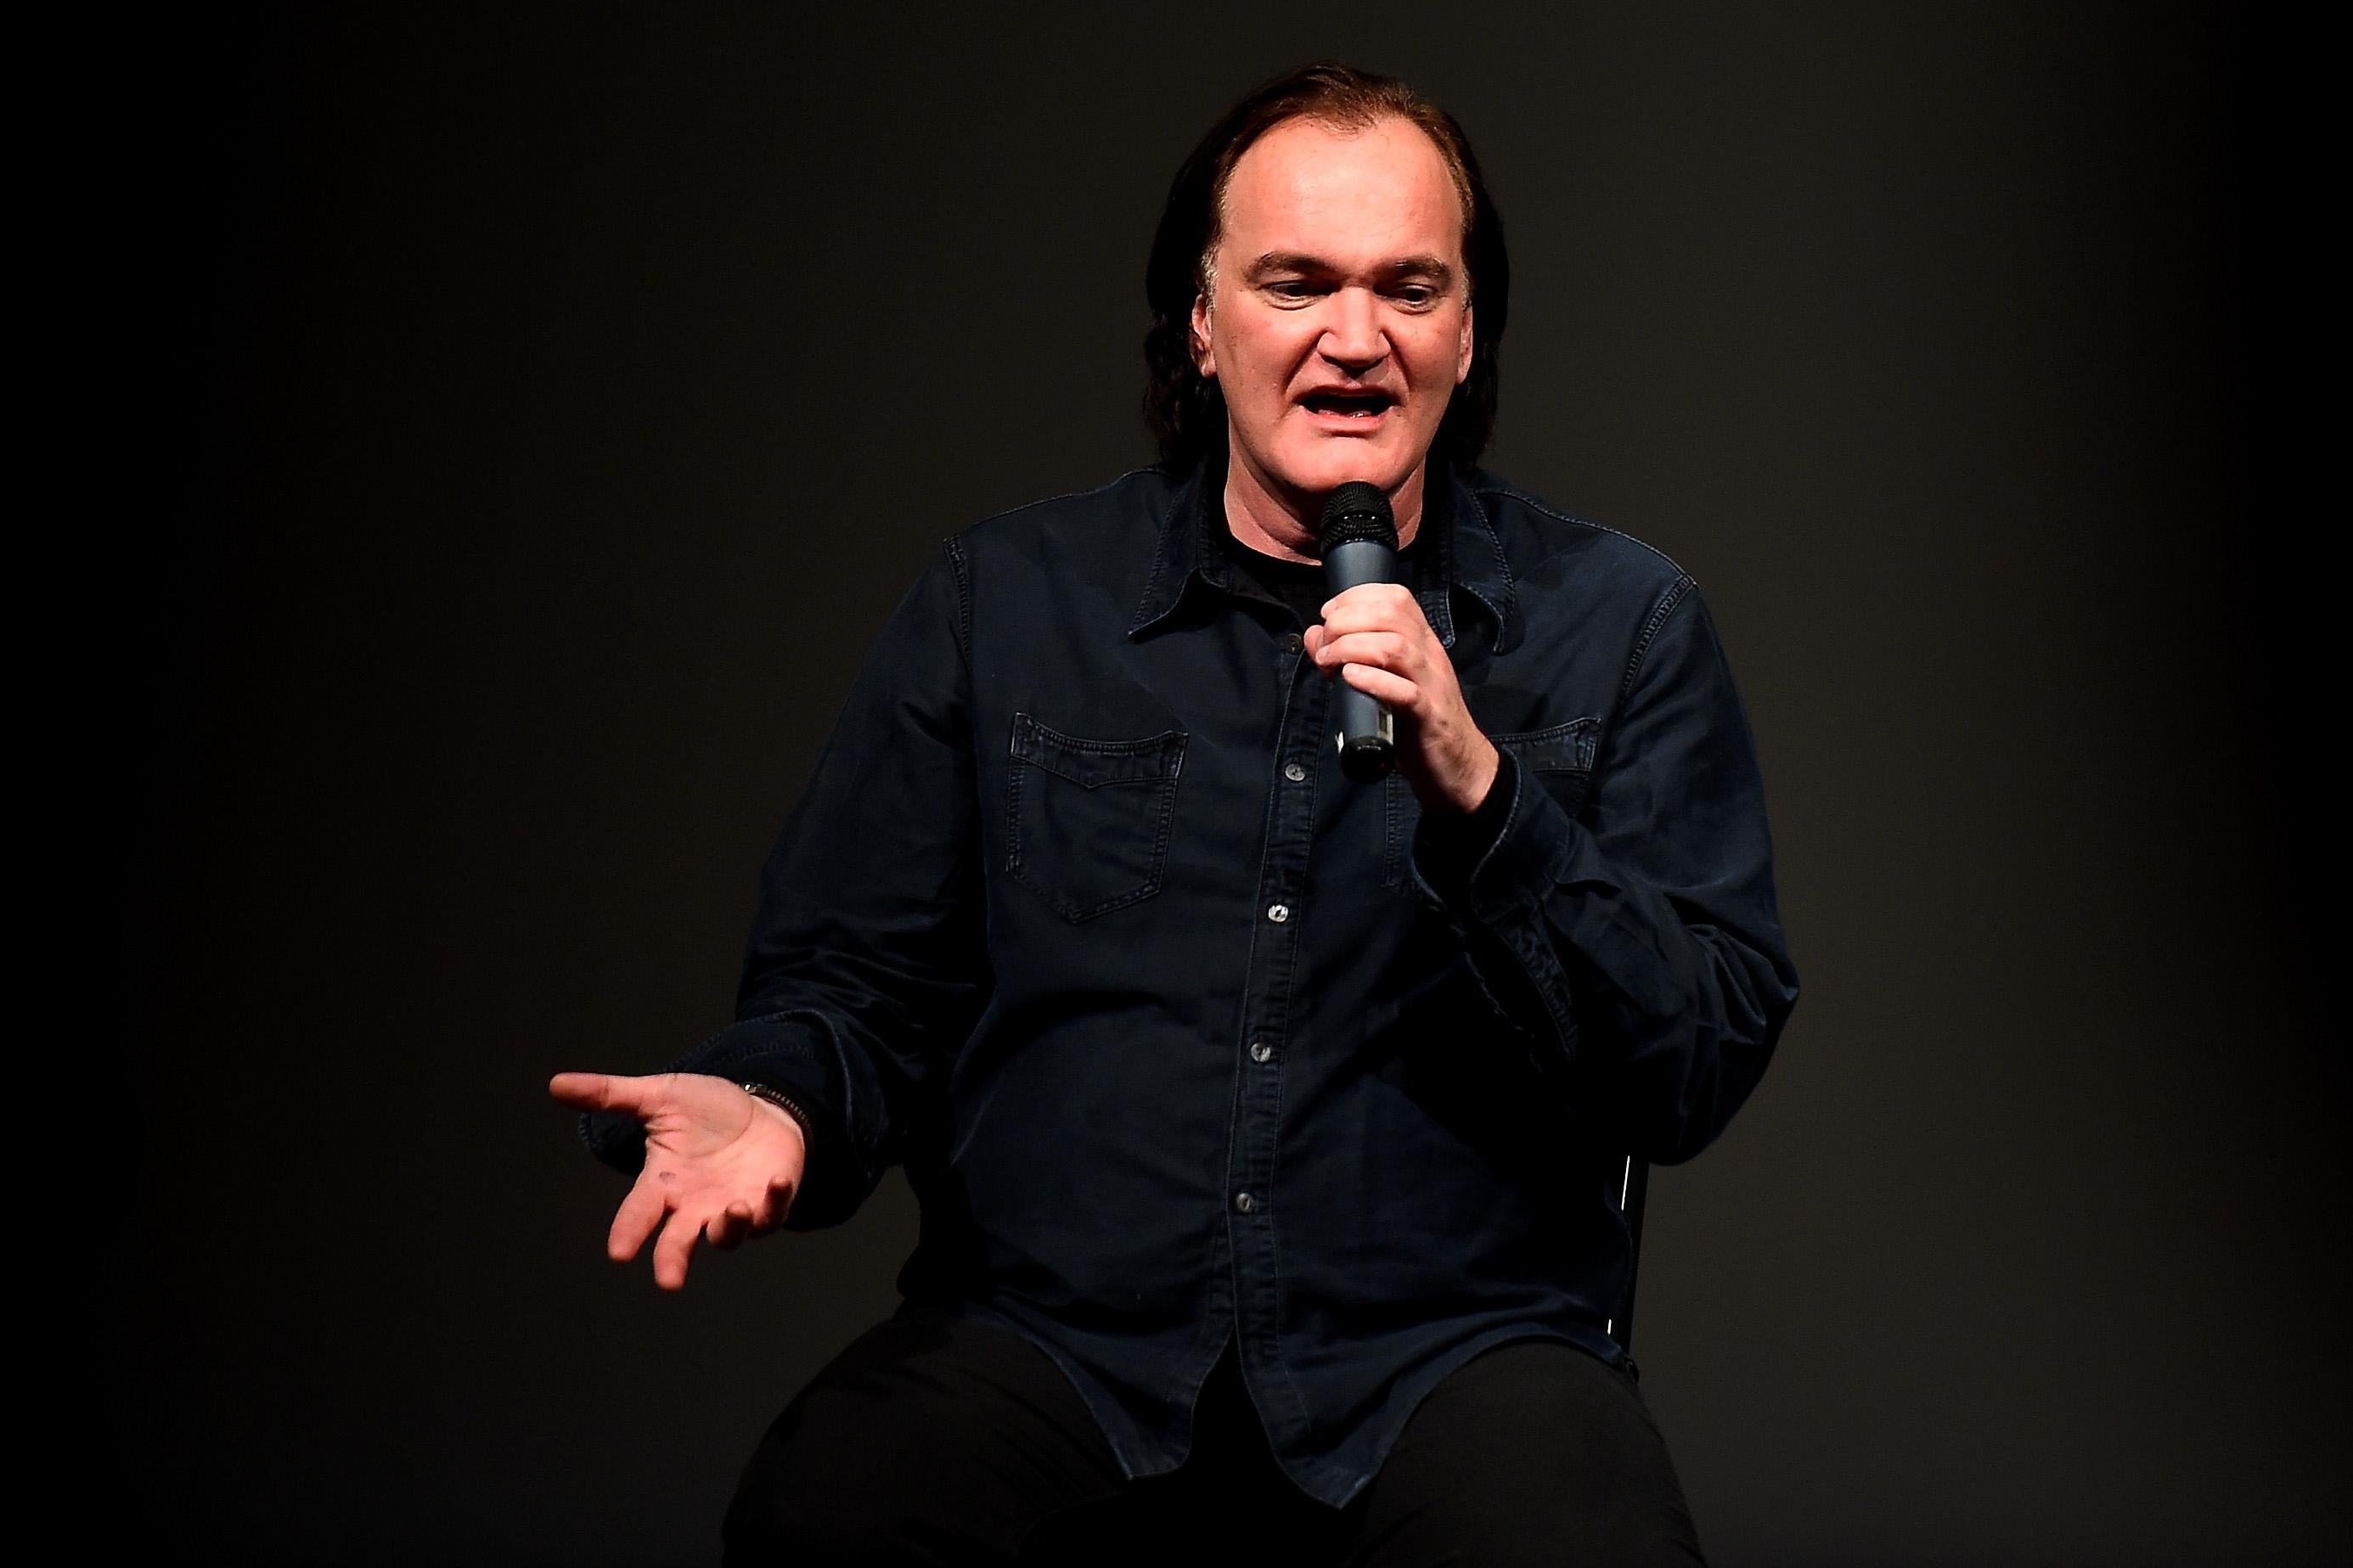 PARK CITY, UT - JANUARY 27:  Director Quentin Tarantino speaks at the 'Reservoir Dogs' 25th Anniversary Screening during the 2017 Sundance Film Festival at Eccles Center Theatre on January 27, 2017 in Park City, Utah.  (Photo by Nicholas Hunt/Getty Images for Sundance Film Festival)